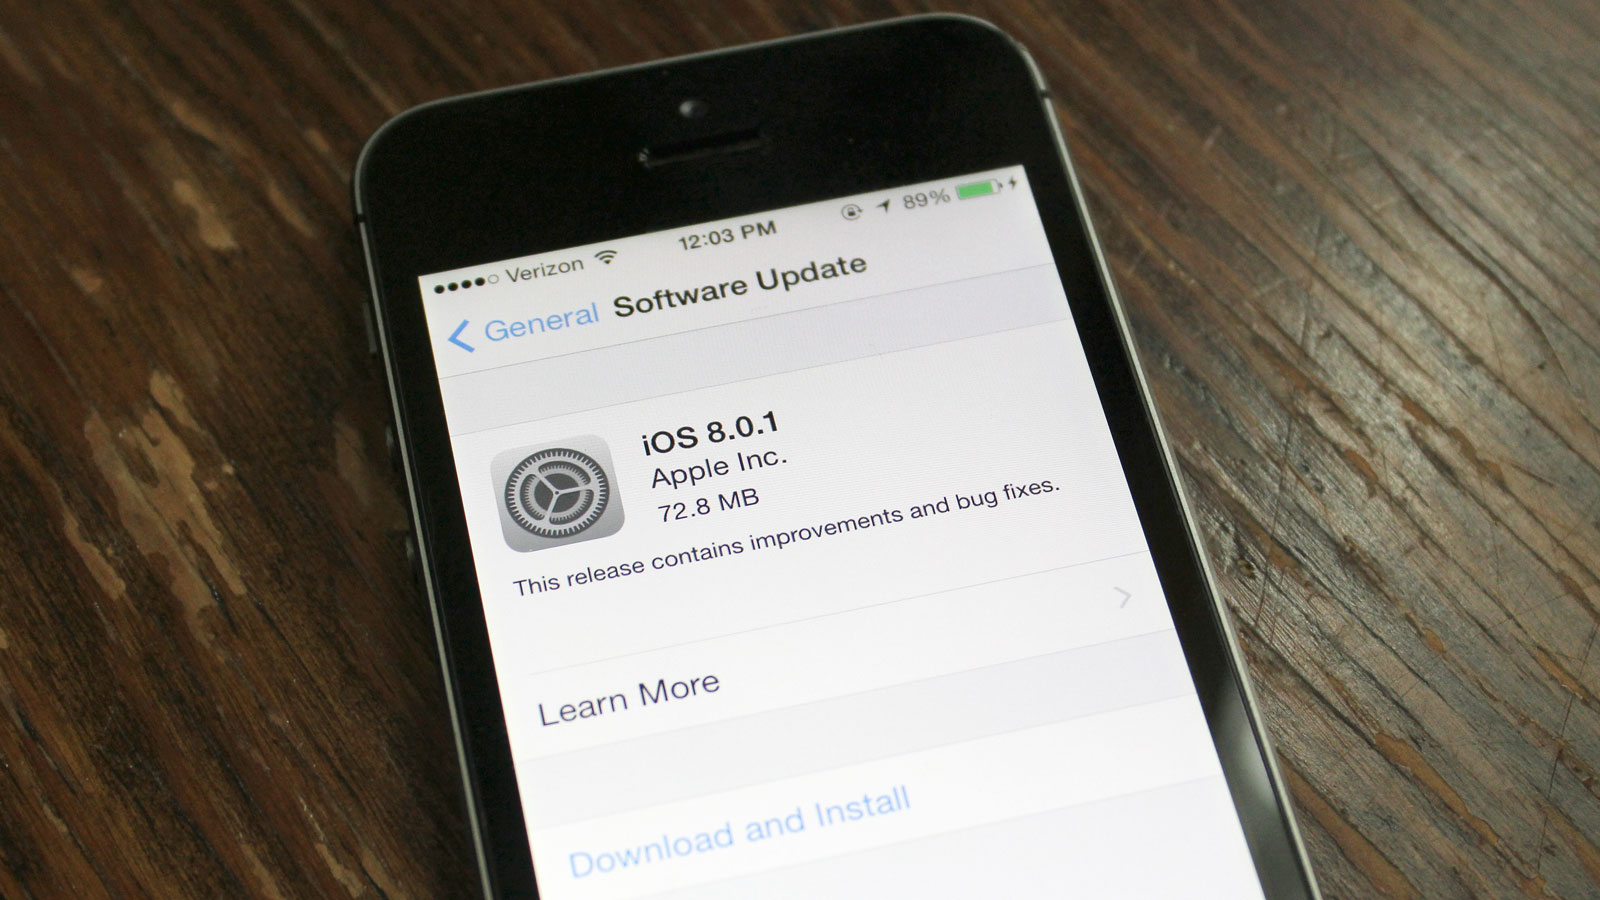 ios-8-0-1-update-causes-problems-apple-offers-solution